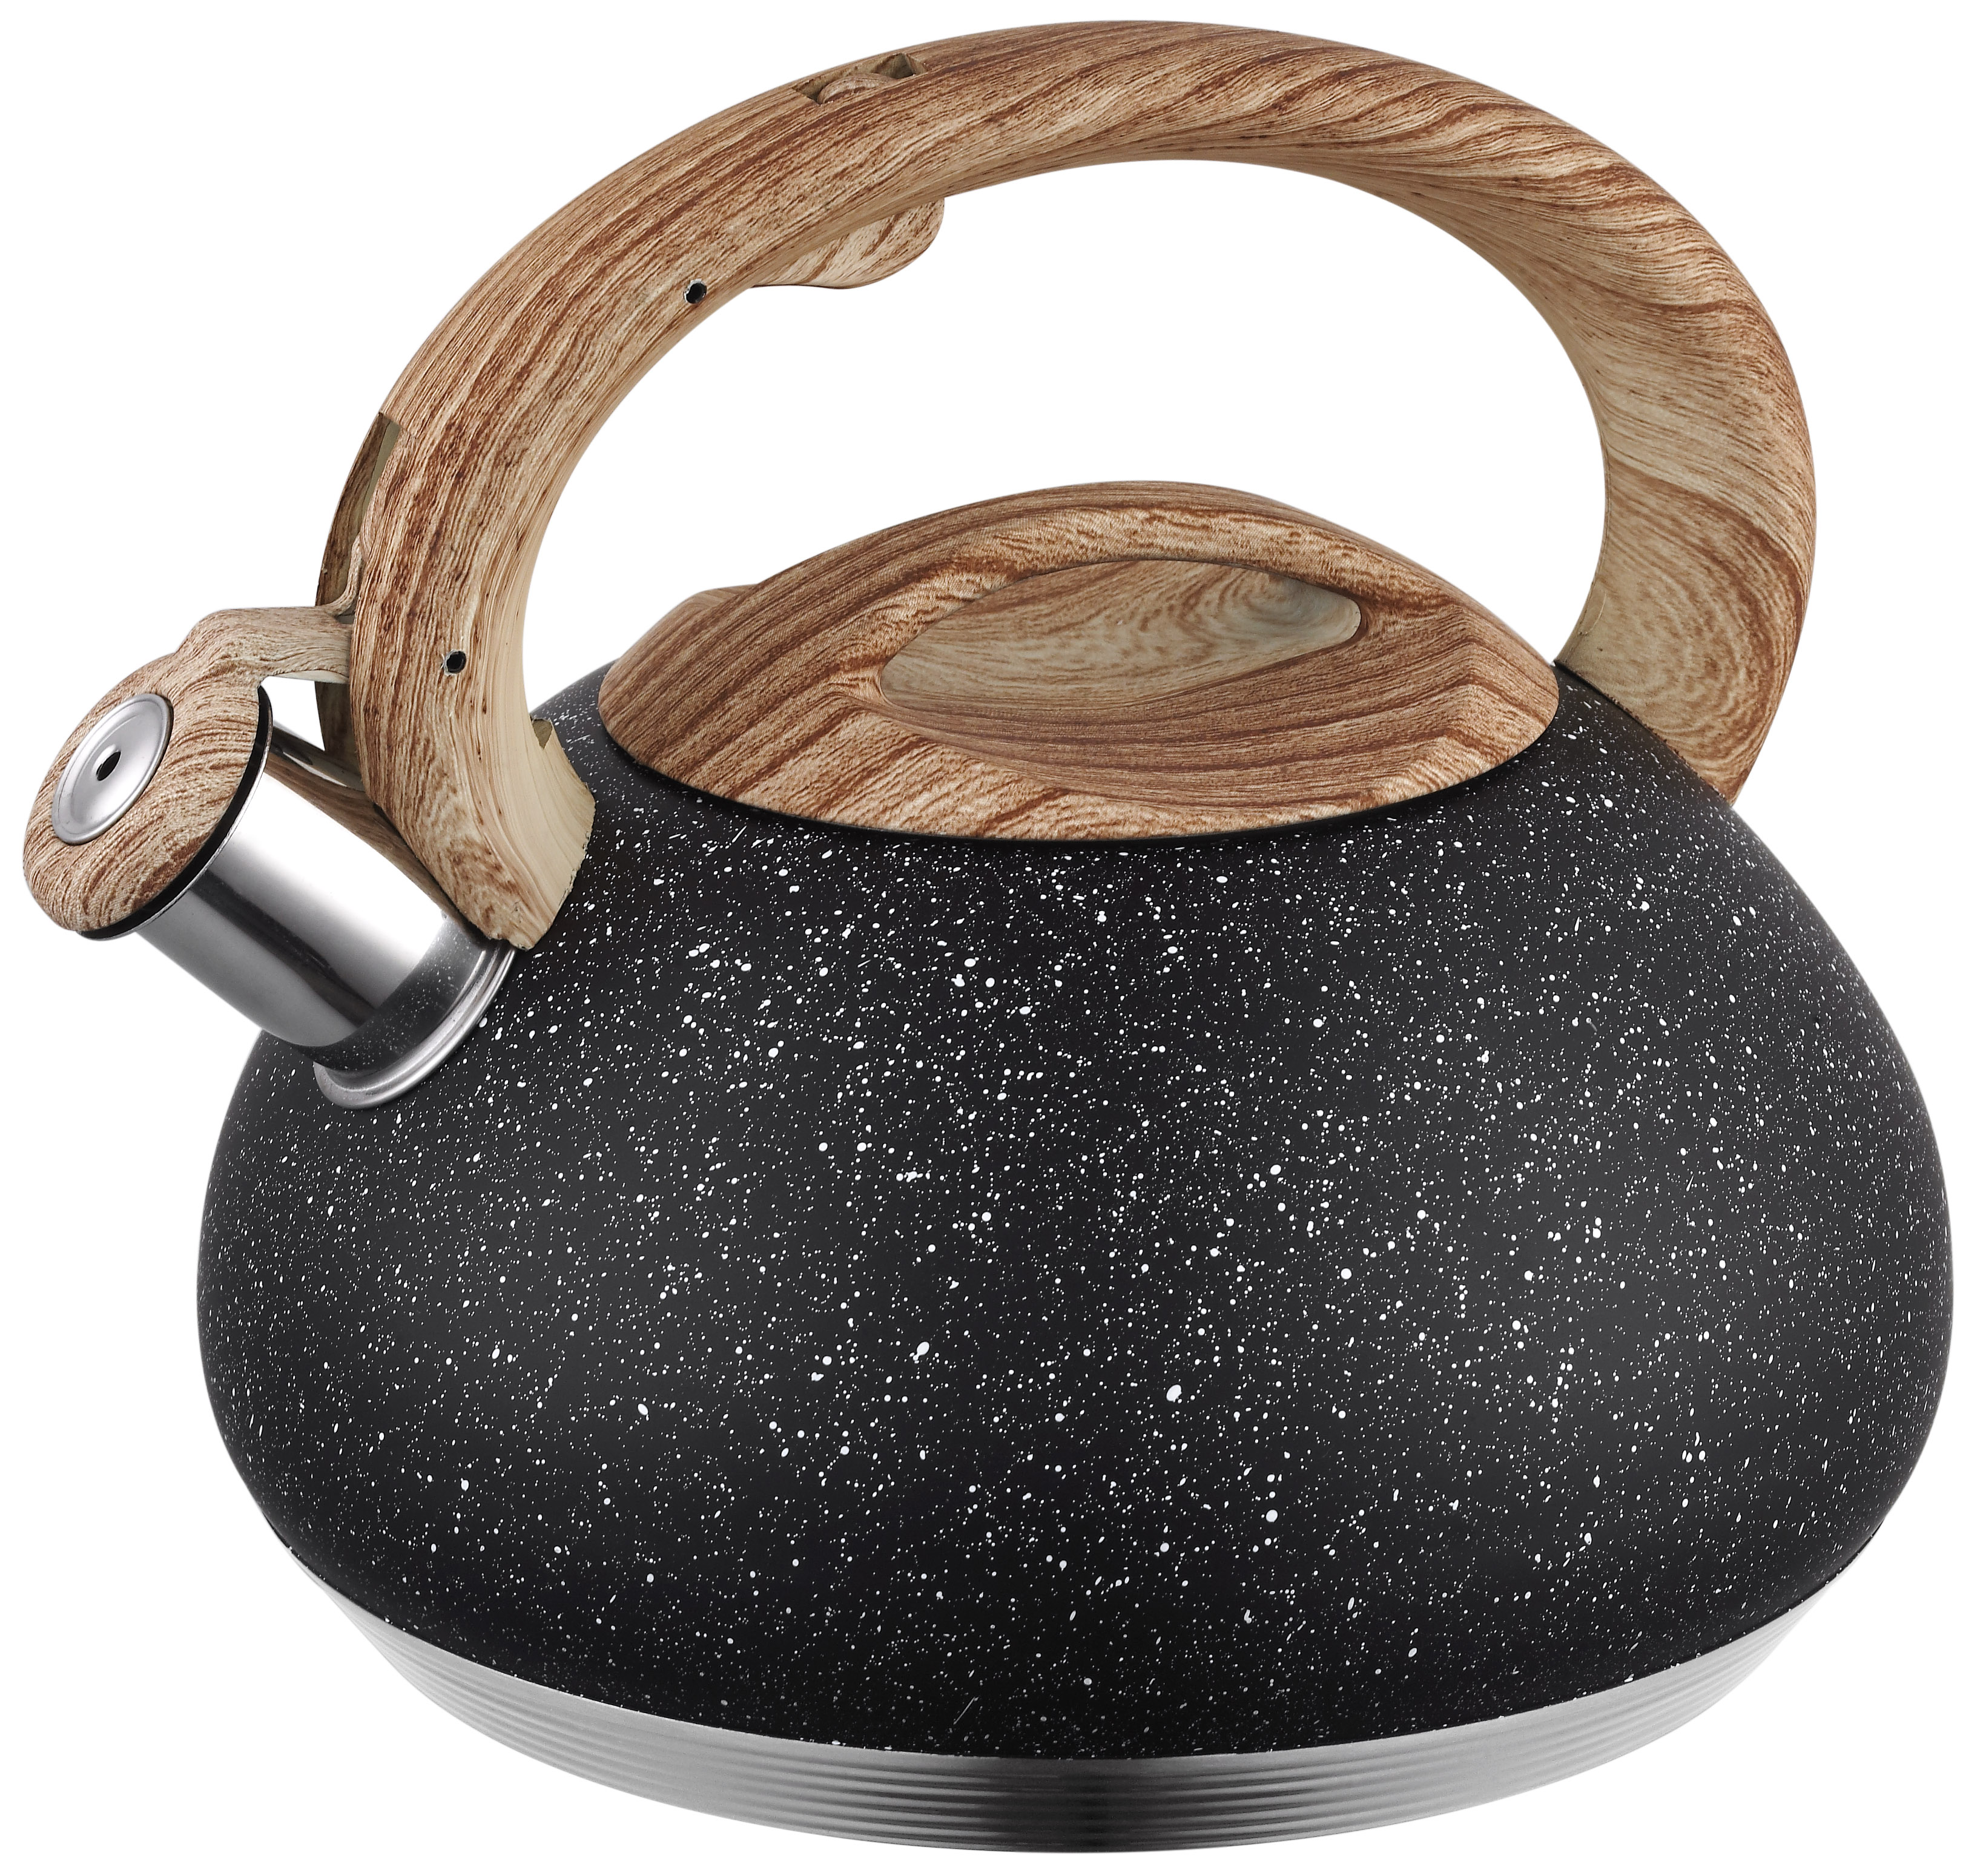 The Timeless Elegance of the Whistling Kettle: A Stainless Steel Classic